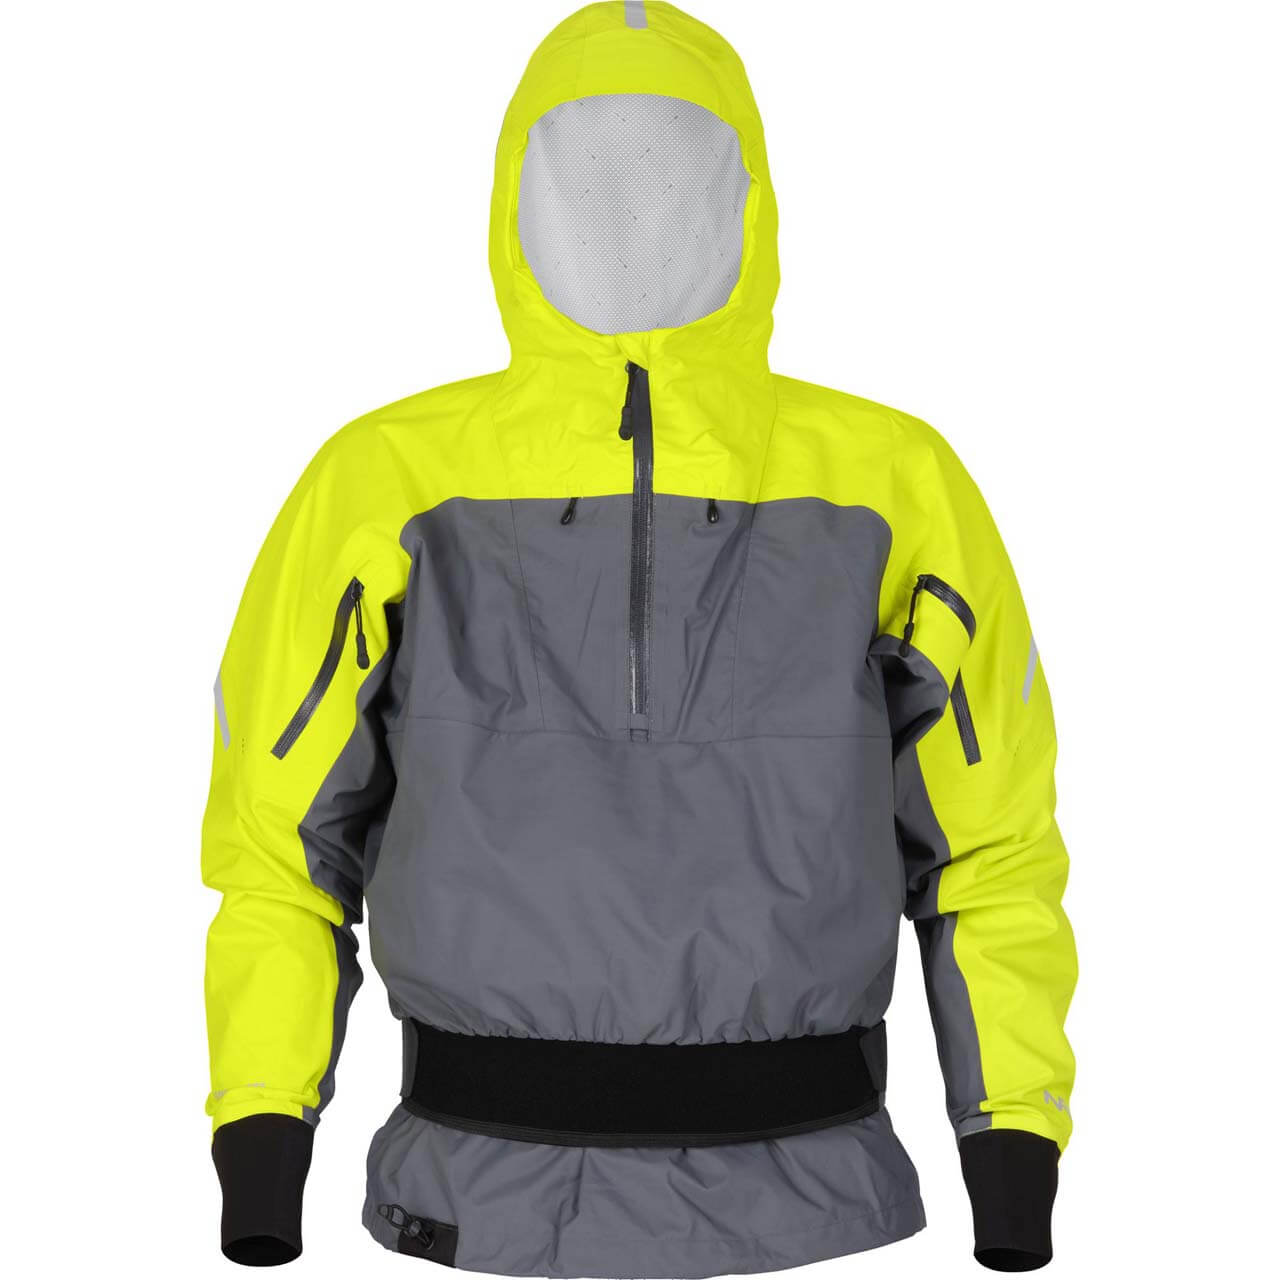 NRS Riptide Touring Paddeljacke - Chartreuse/Gray, S von NRS}